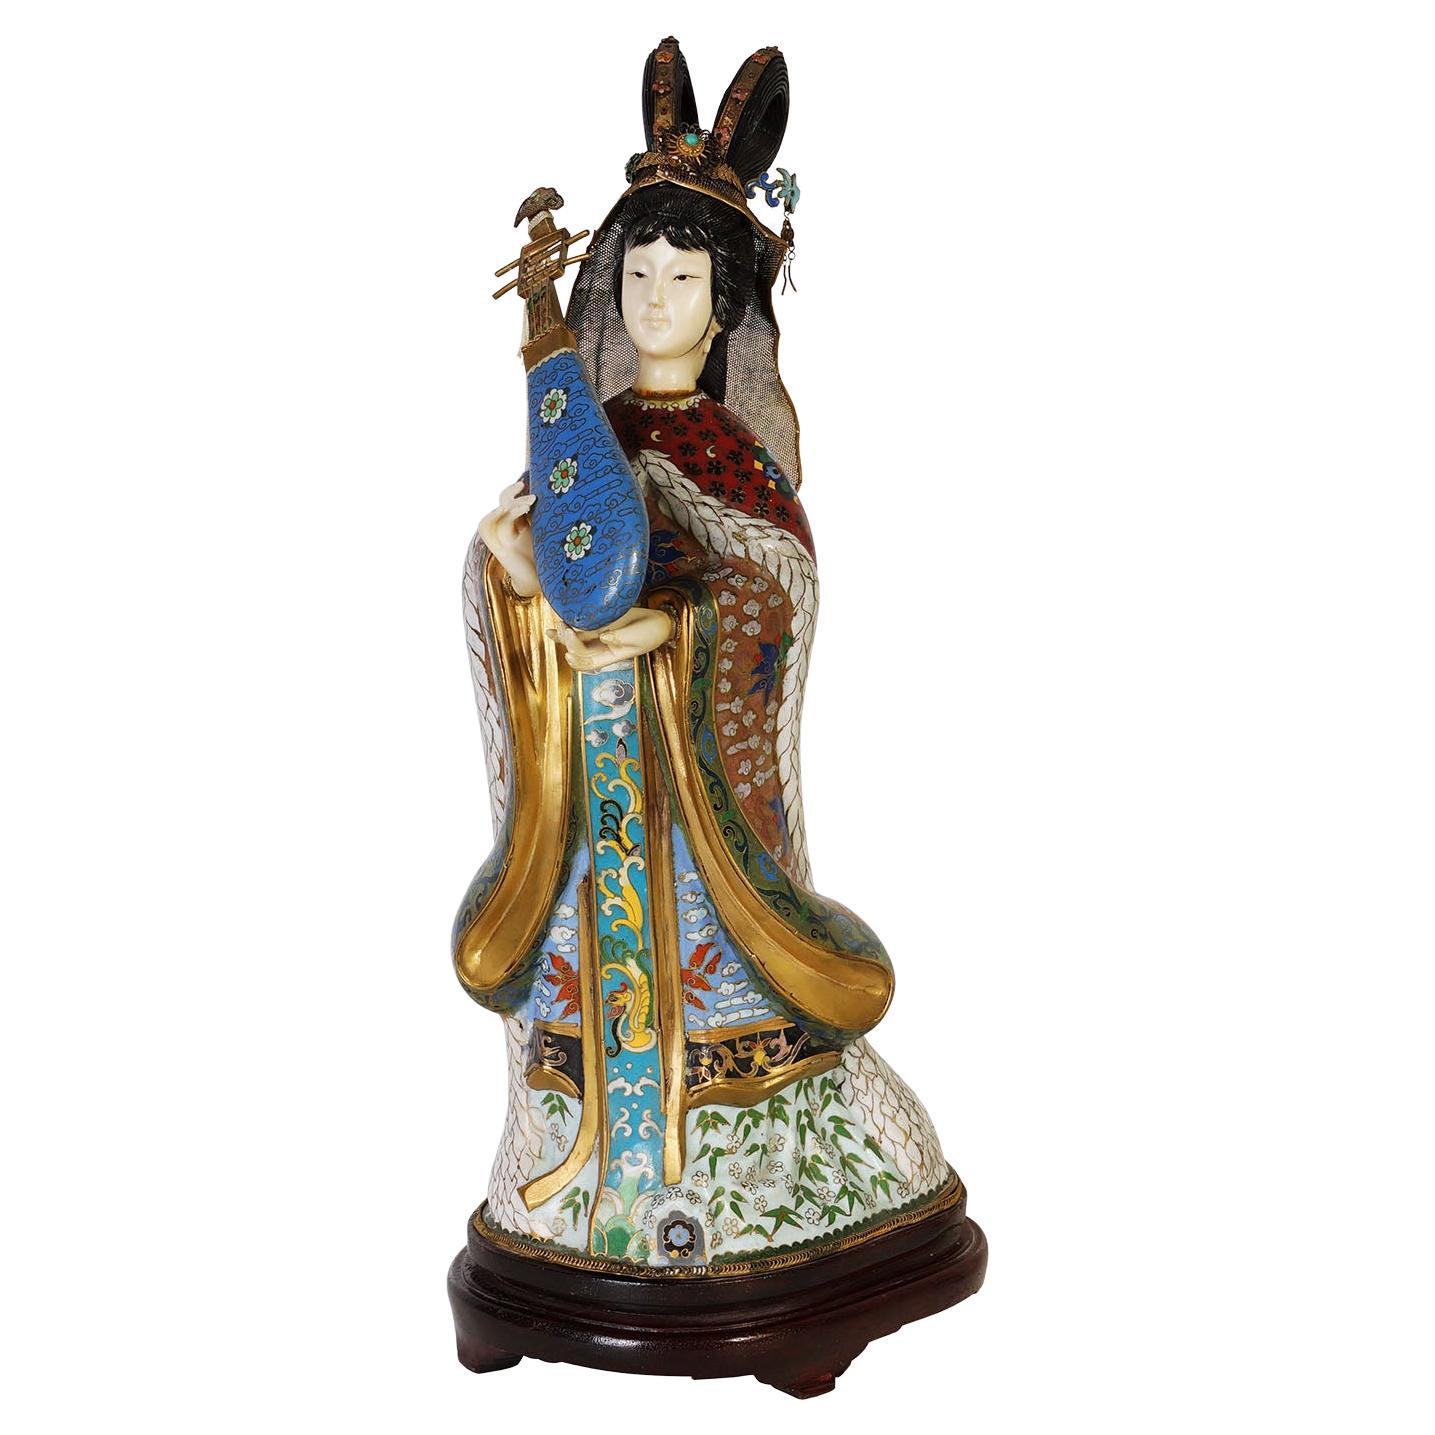 20th Century Chinese Antique Cloisonne Figurine with Musical Instrument